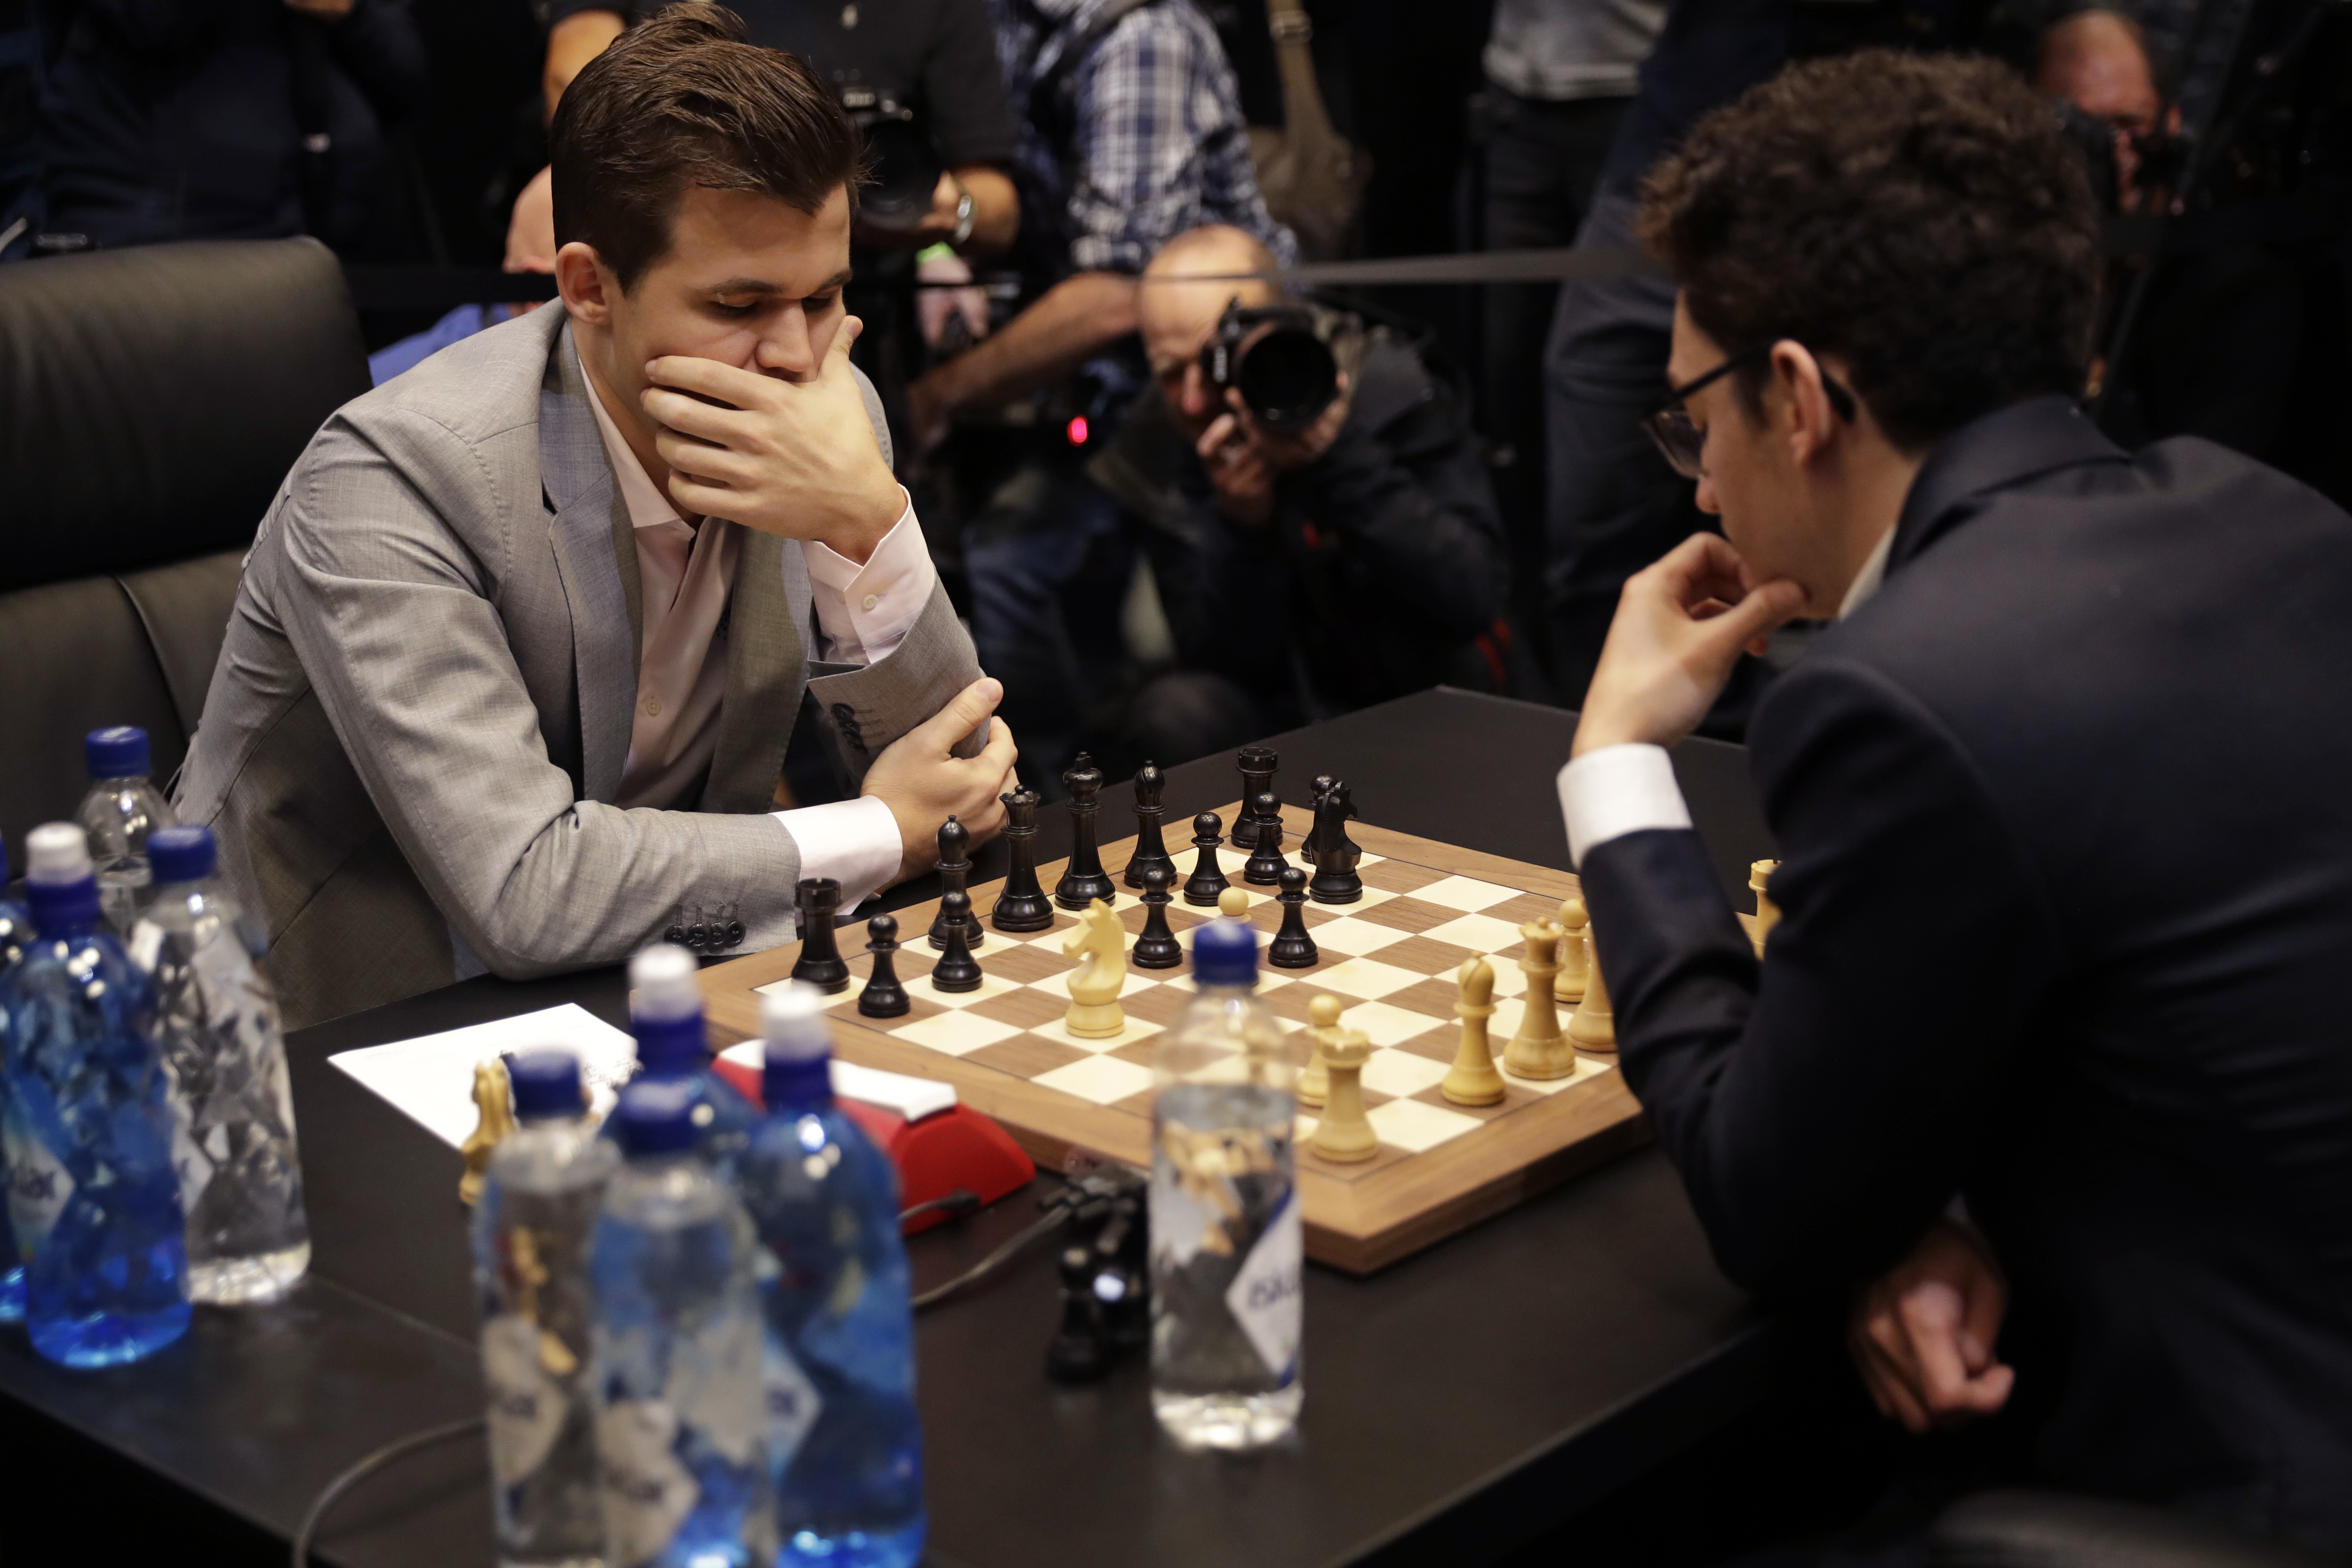 Novel opening produces another draw in Carlsen-Caruana world chess match -  Washington Times